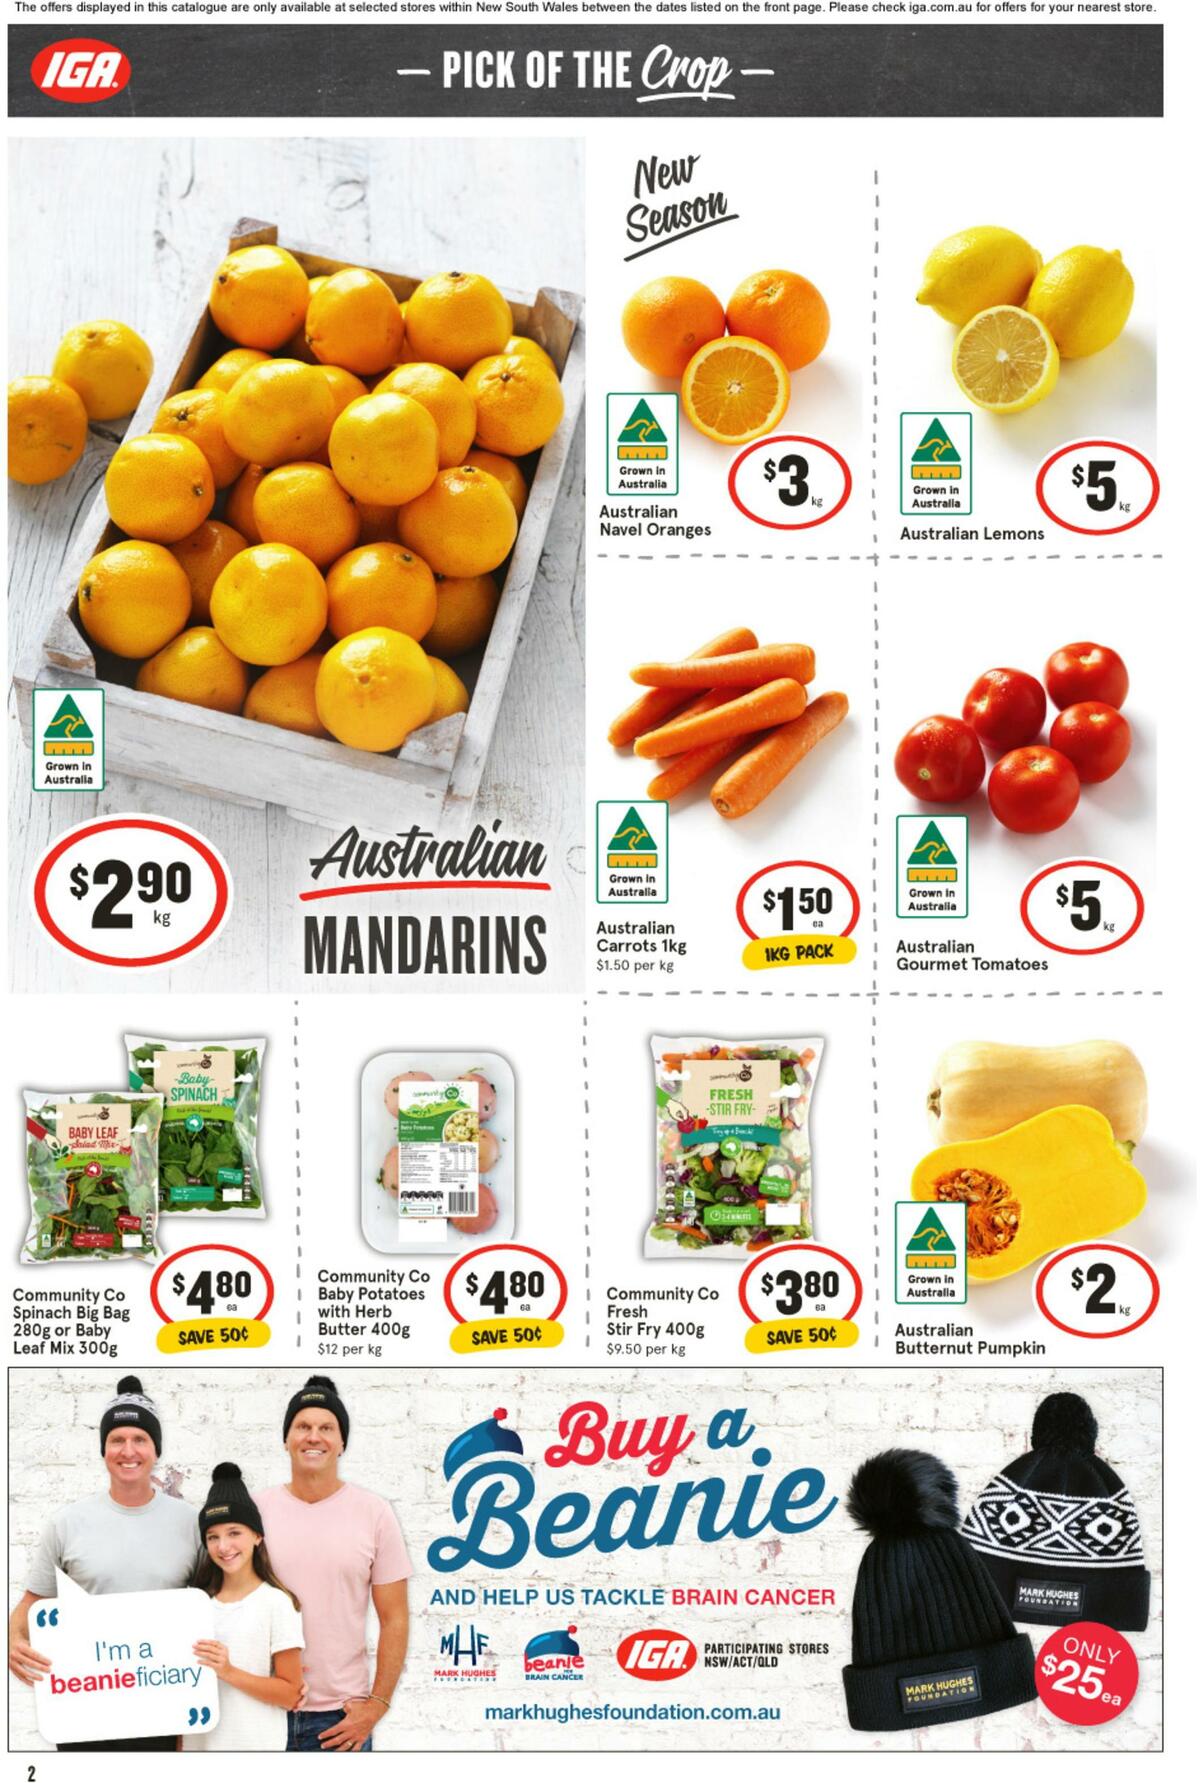 IGA Catalogues from 7 June